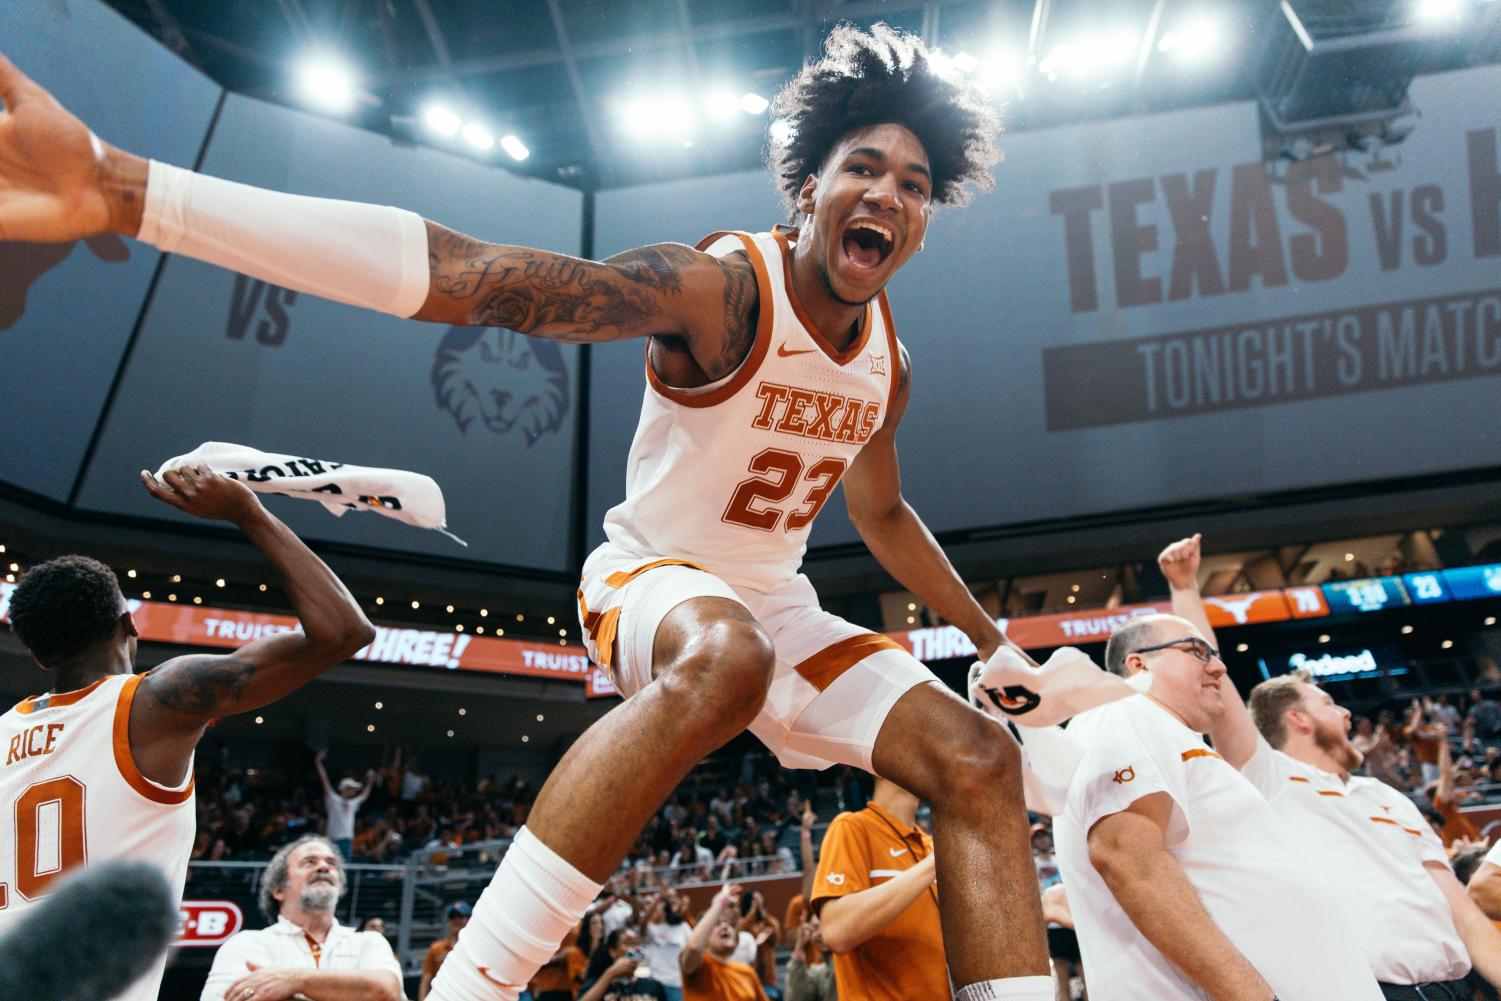 Dillon Mitchell withdraws from NBA Draft, returns to Texas - Burnt